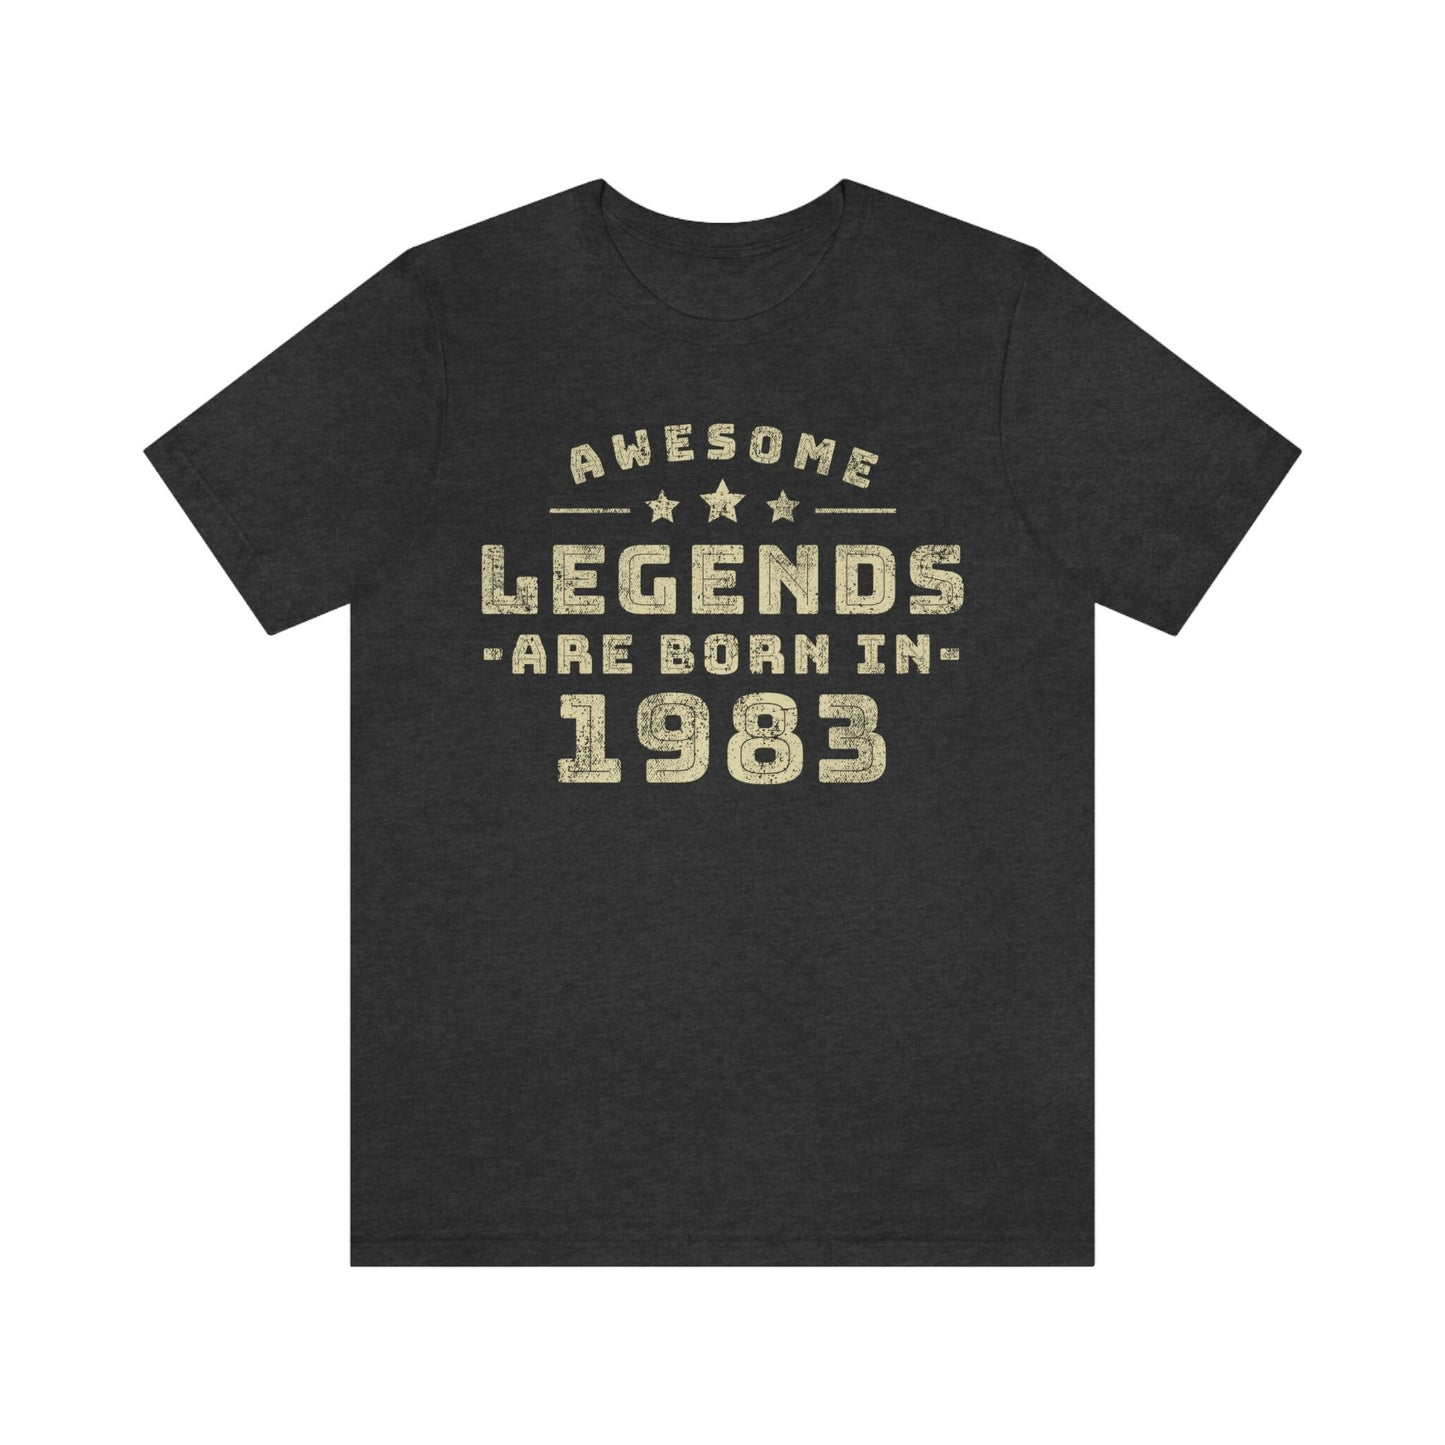 Awesome Legends are born in 1983, Birthday gift t-shirt for men or wome